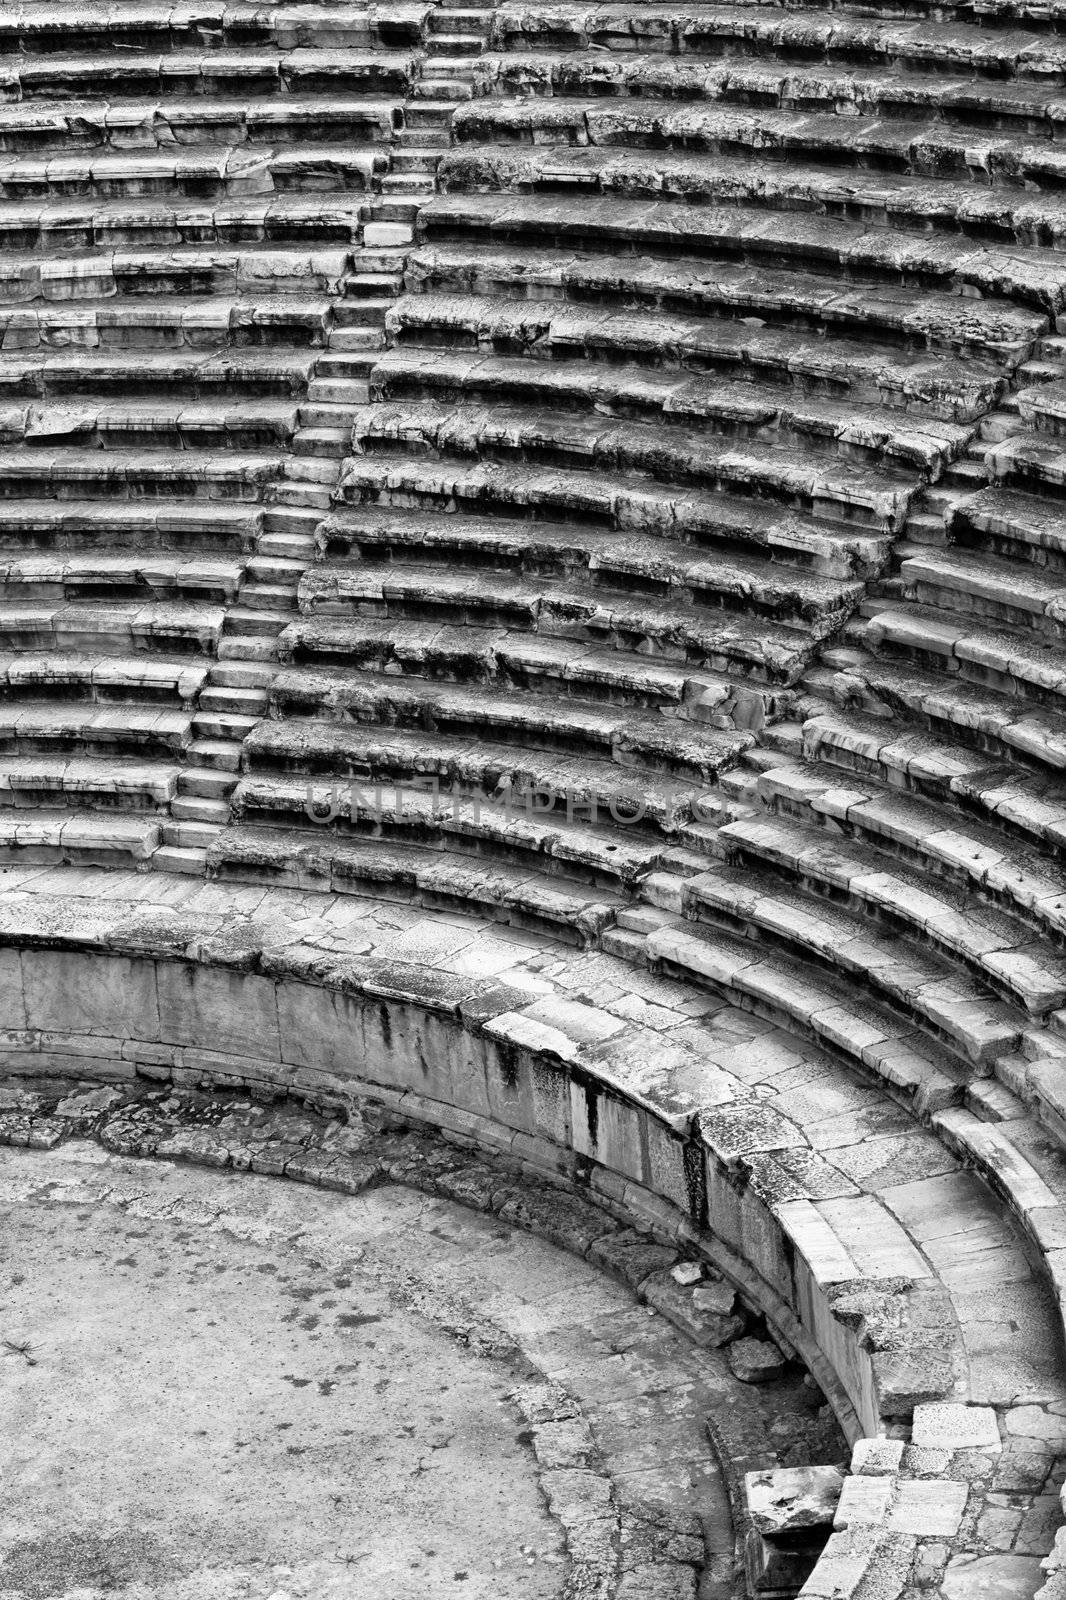 Theatre in Hierapolis by Vof